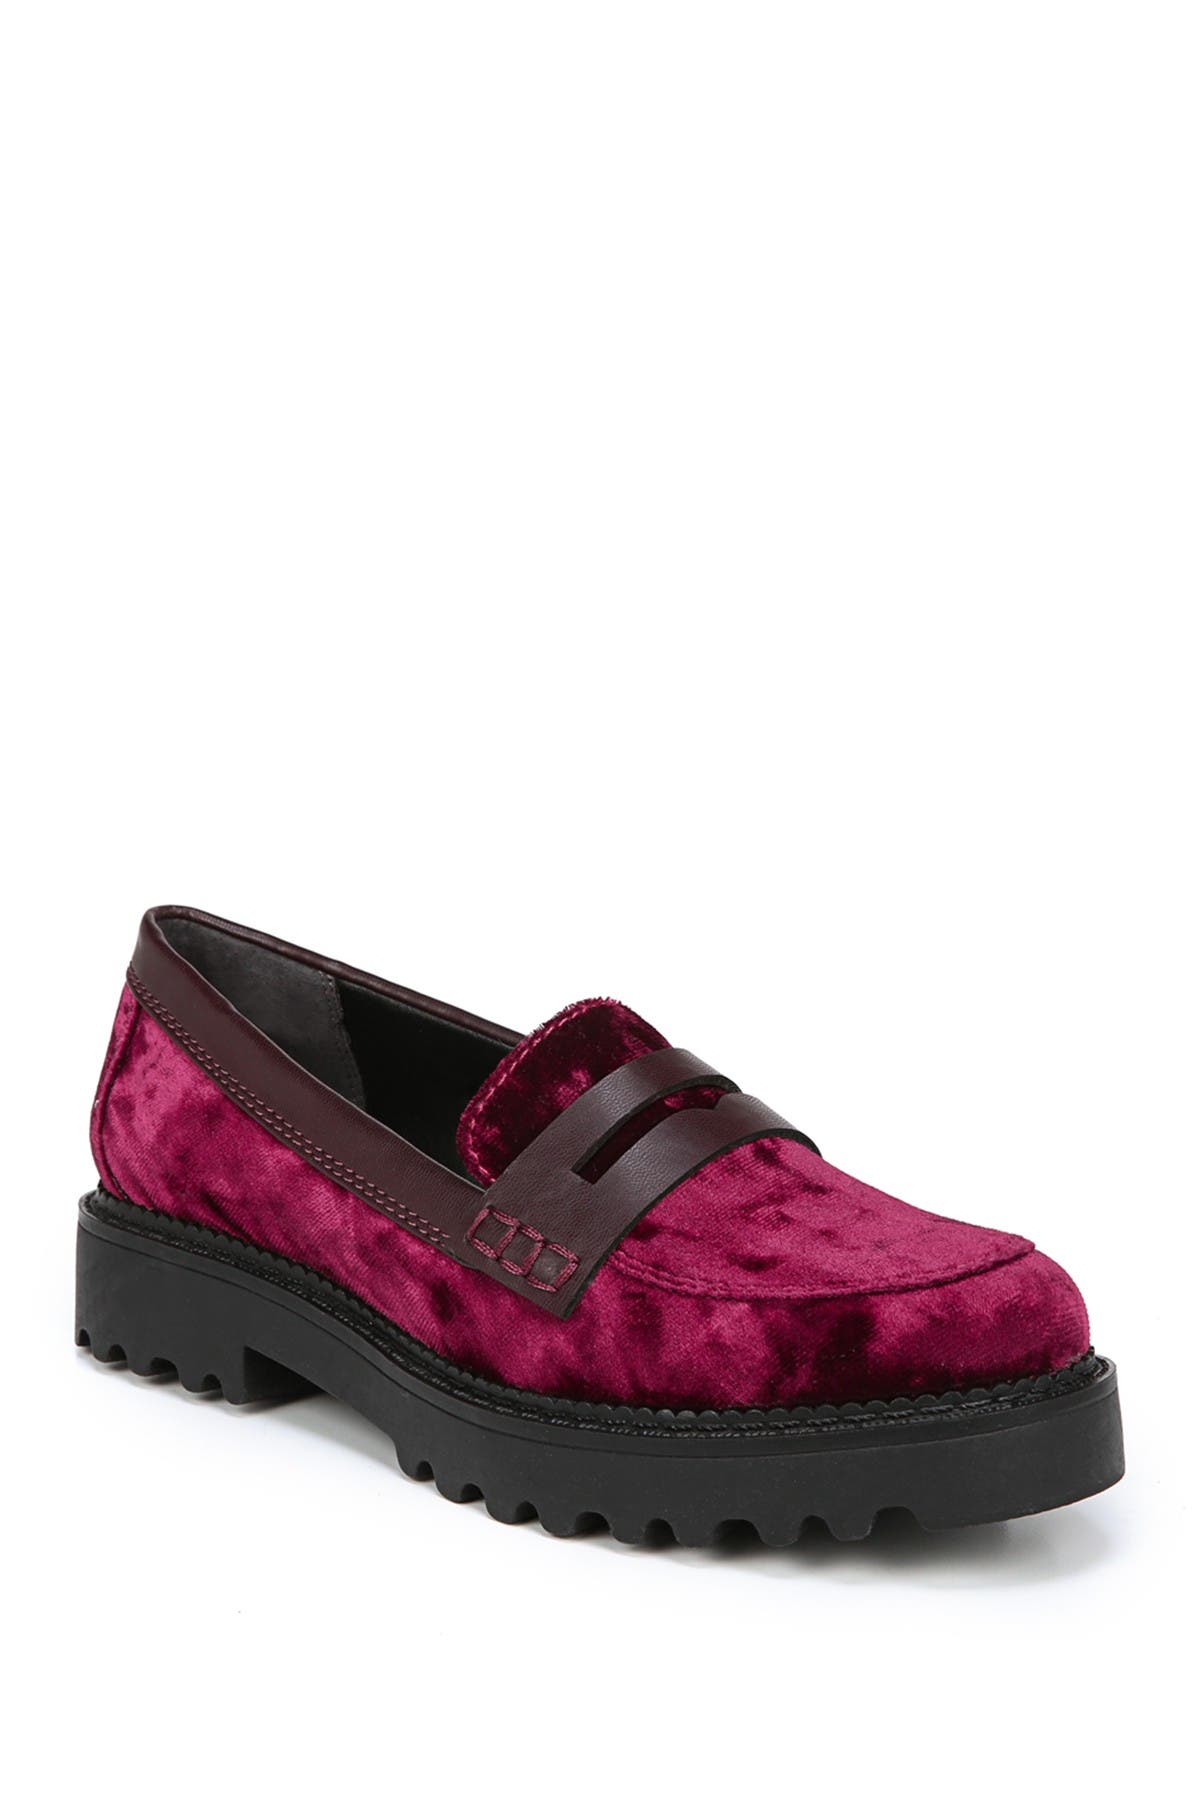 circus by sam edelman loafers